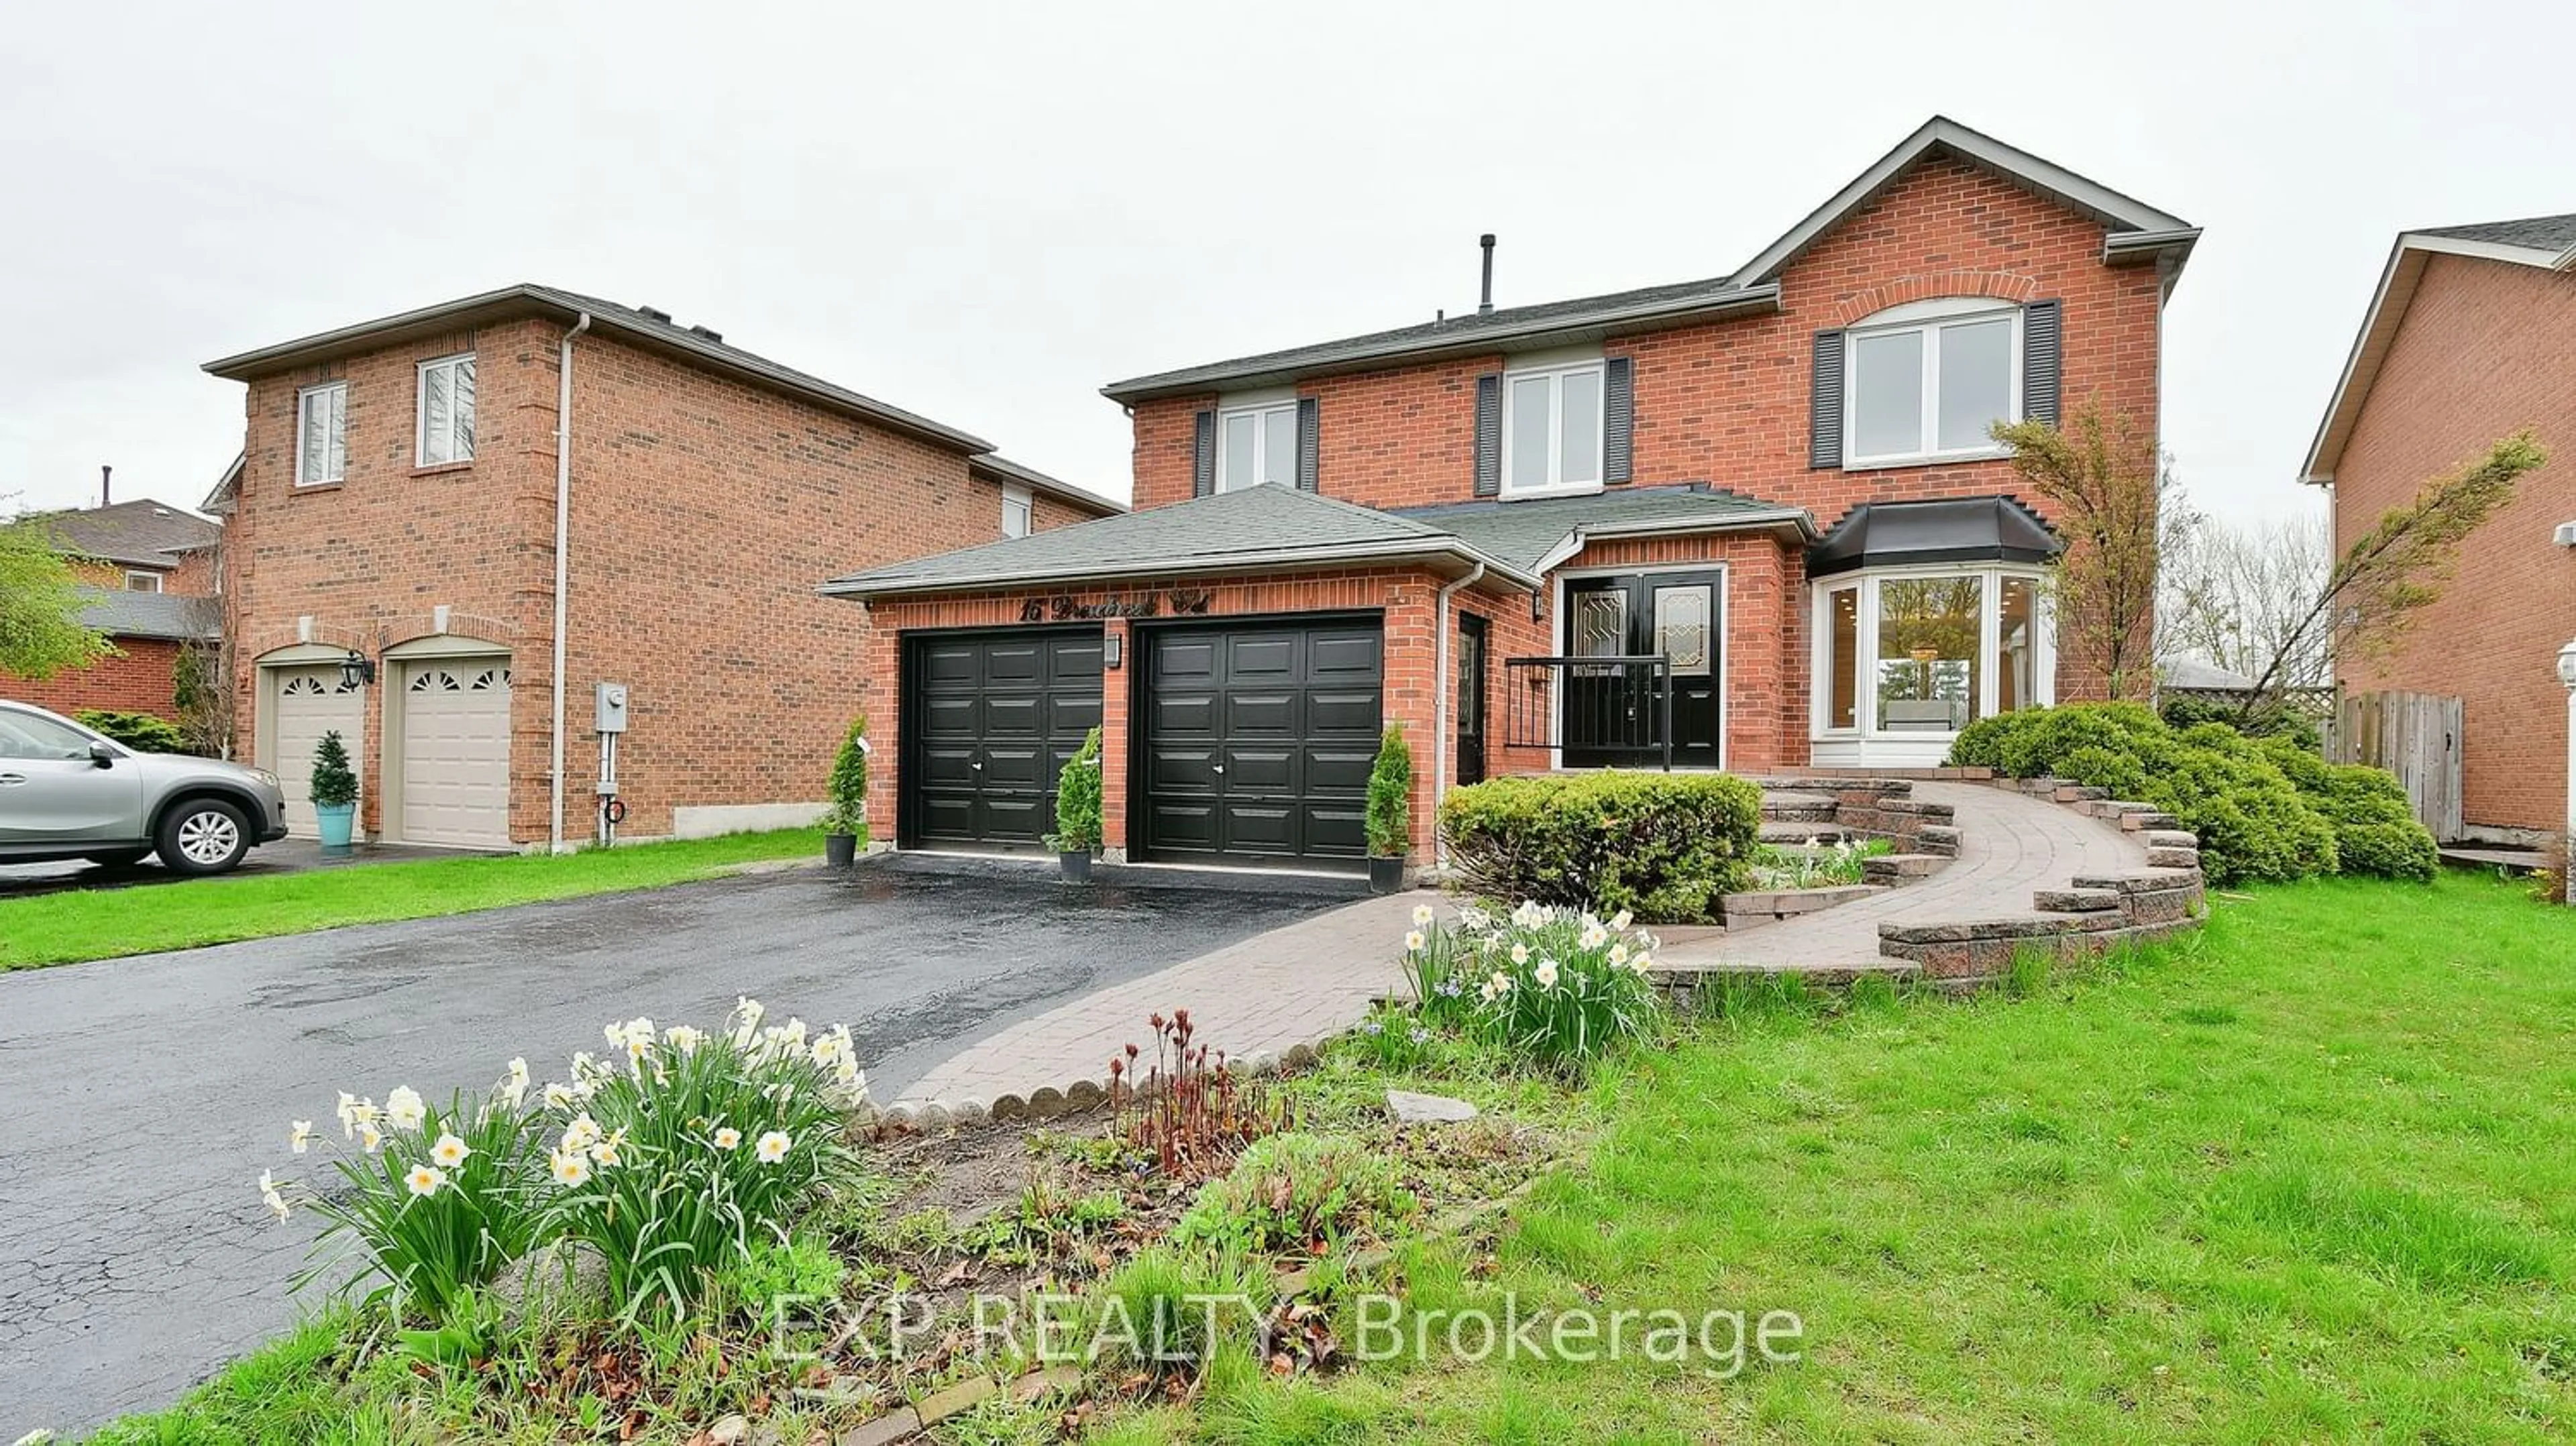 Home with brick exterior material for 15 Drewbrook Crt, Whitby Ontario L1N 8M9